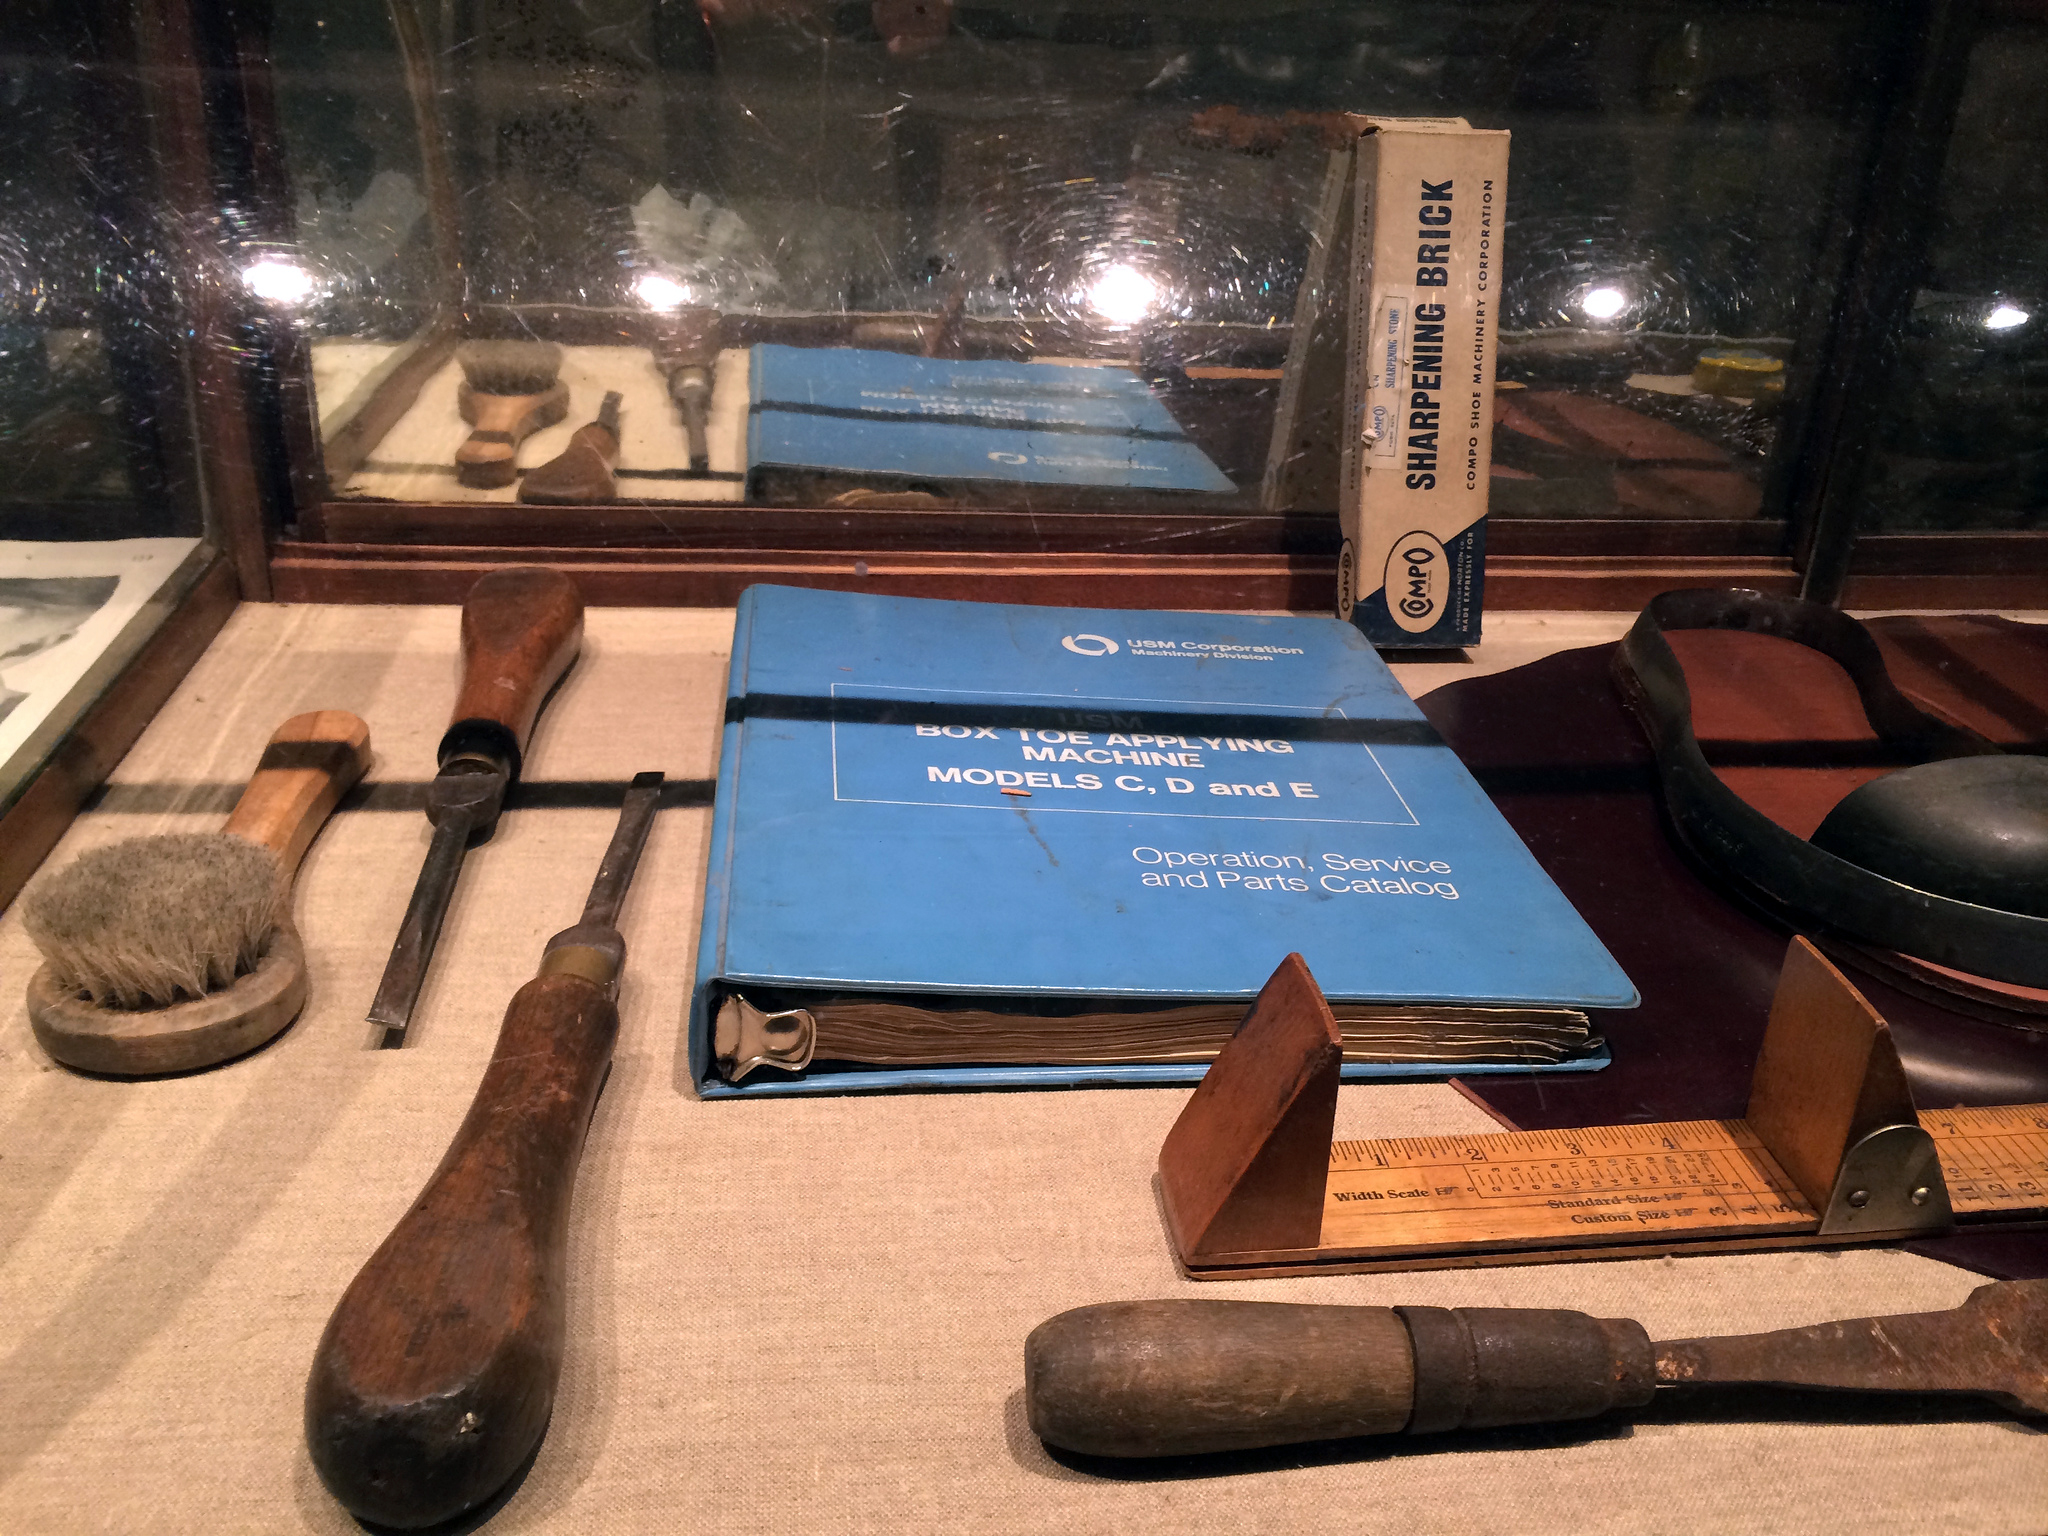 Vintage tools at Wolverine in New York. Photo by alphacityguides.